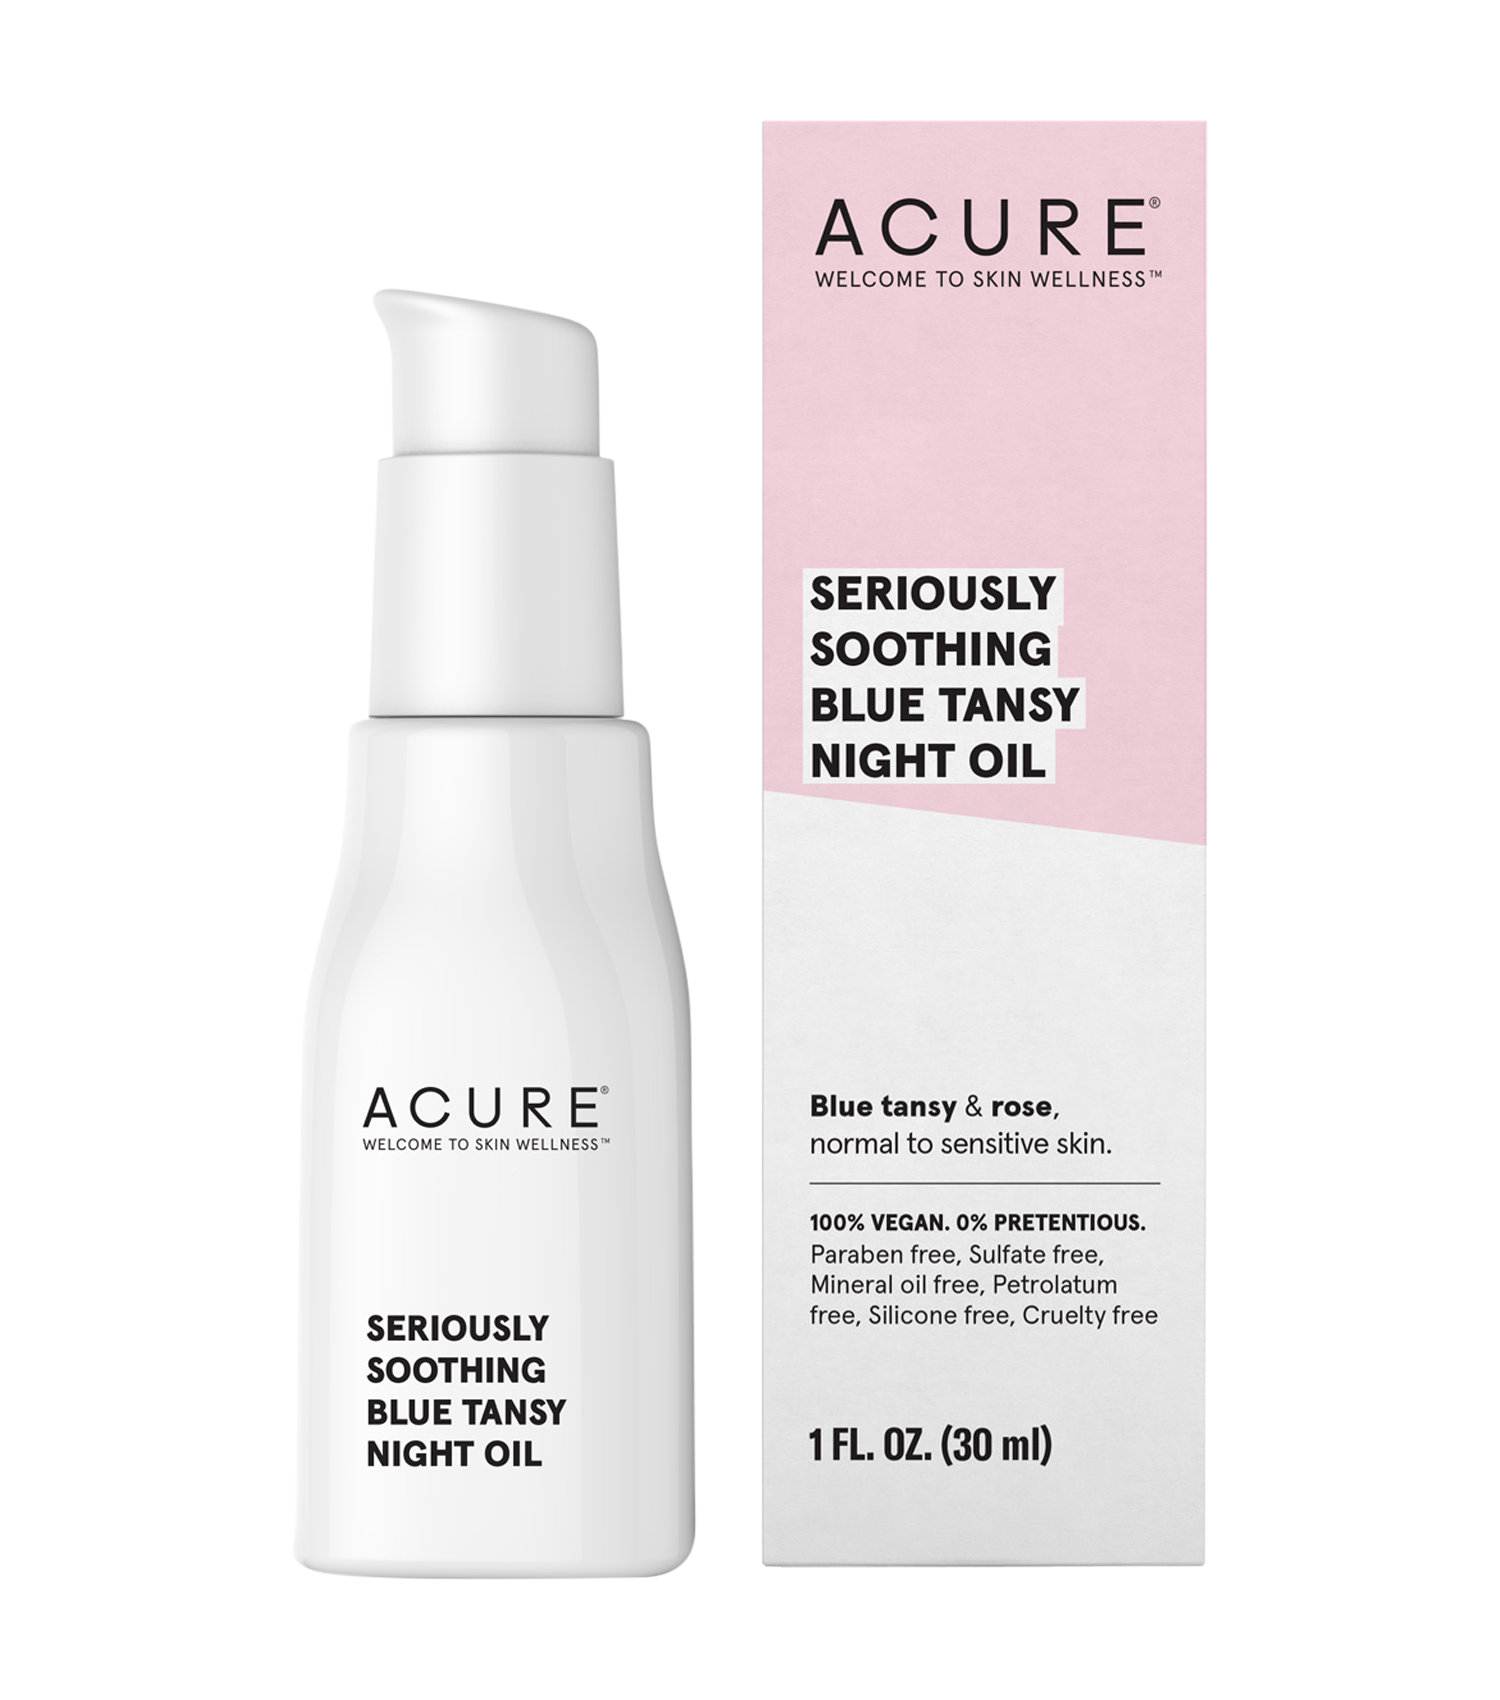 Acure Organics SERIOUSLY SOOTHING BLUE TANSY NIGHT OIL